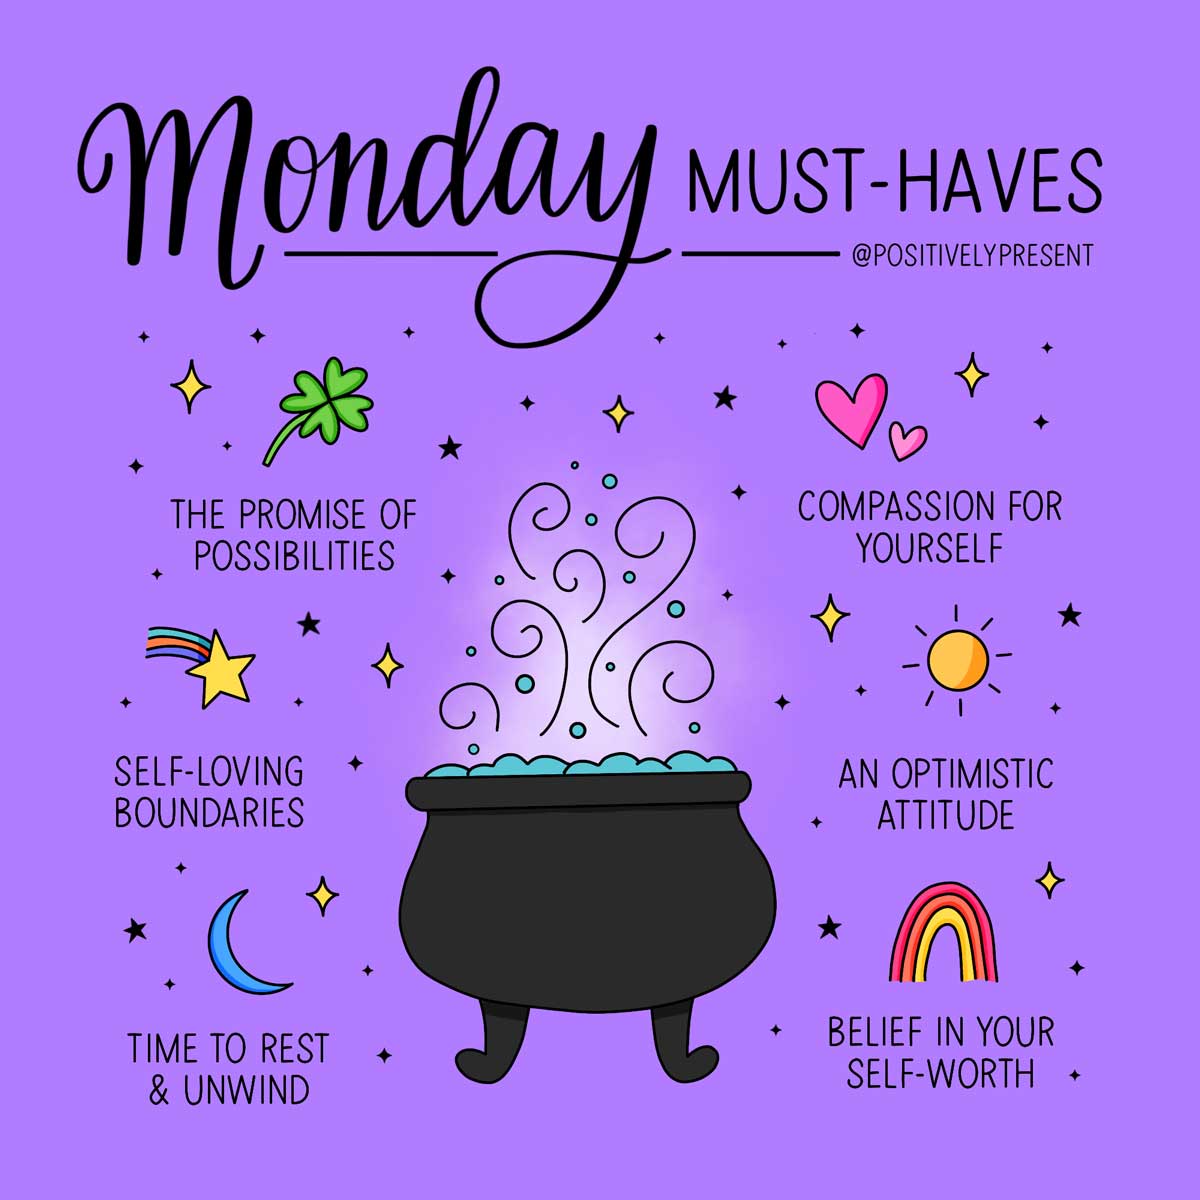 illustration of cauldron on purple background lists monday must-haves with cute icons.